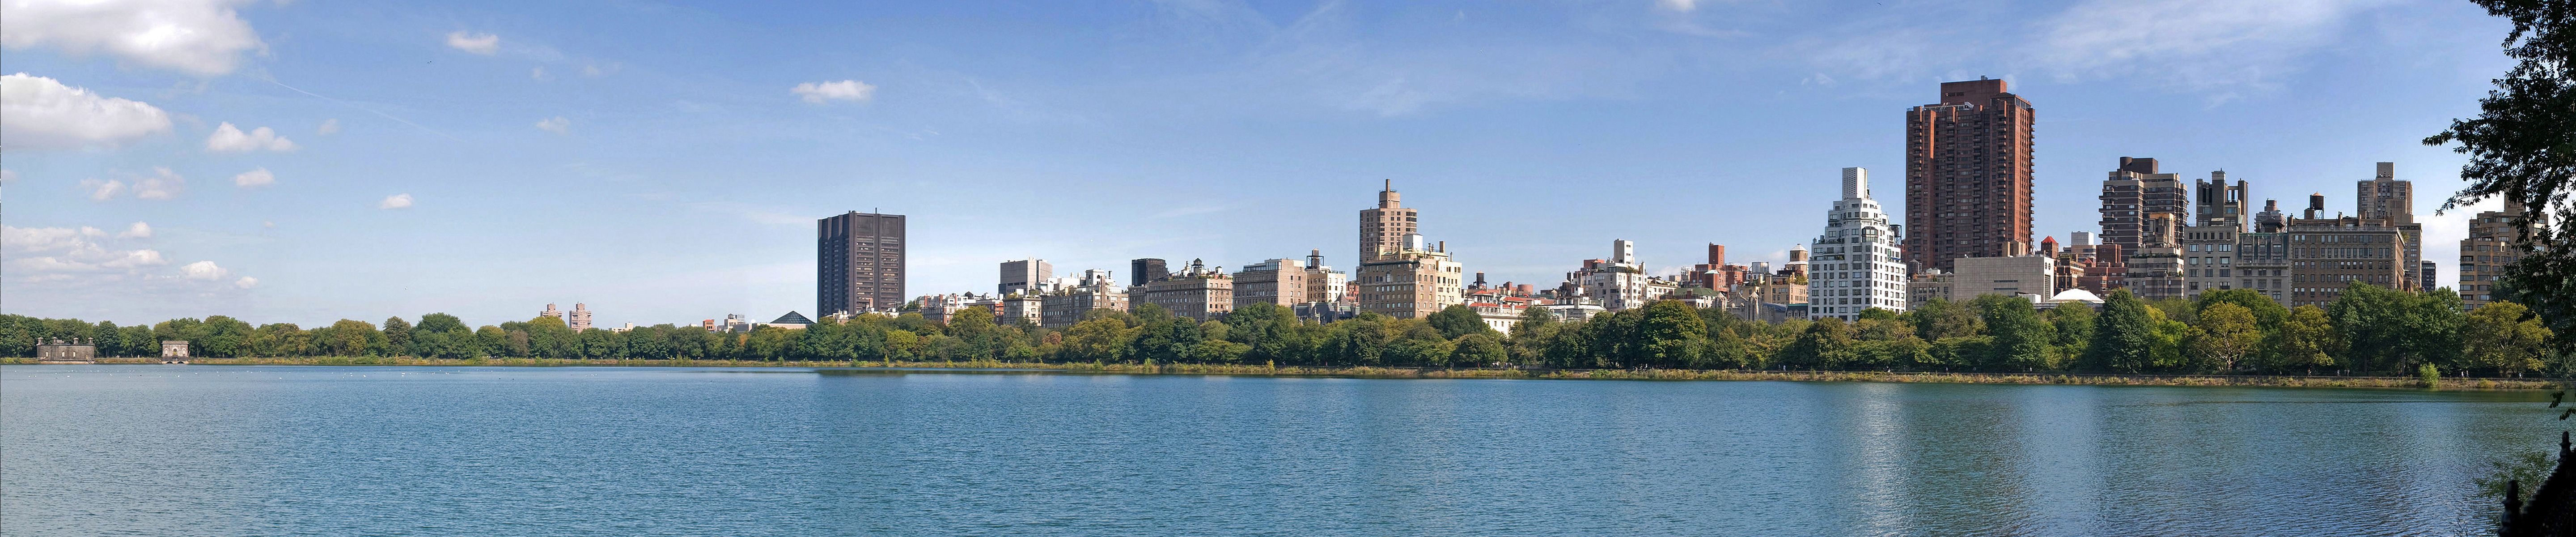 Wallpaper New York City Central Park – Triple monitor display 5760 ...